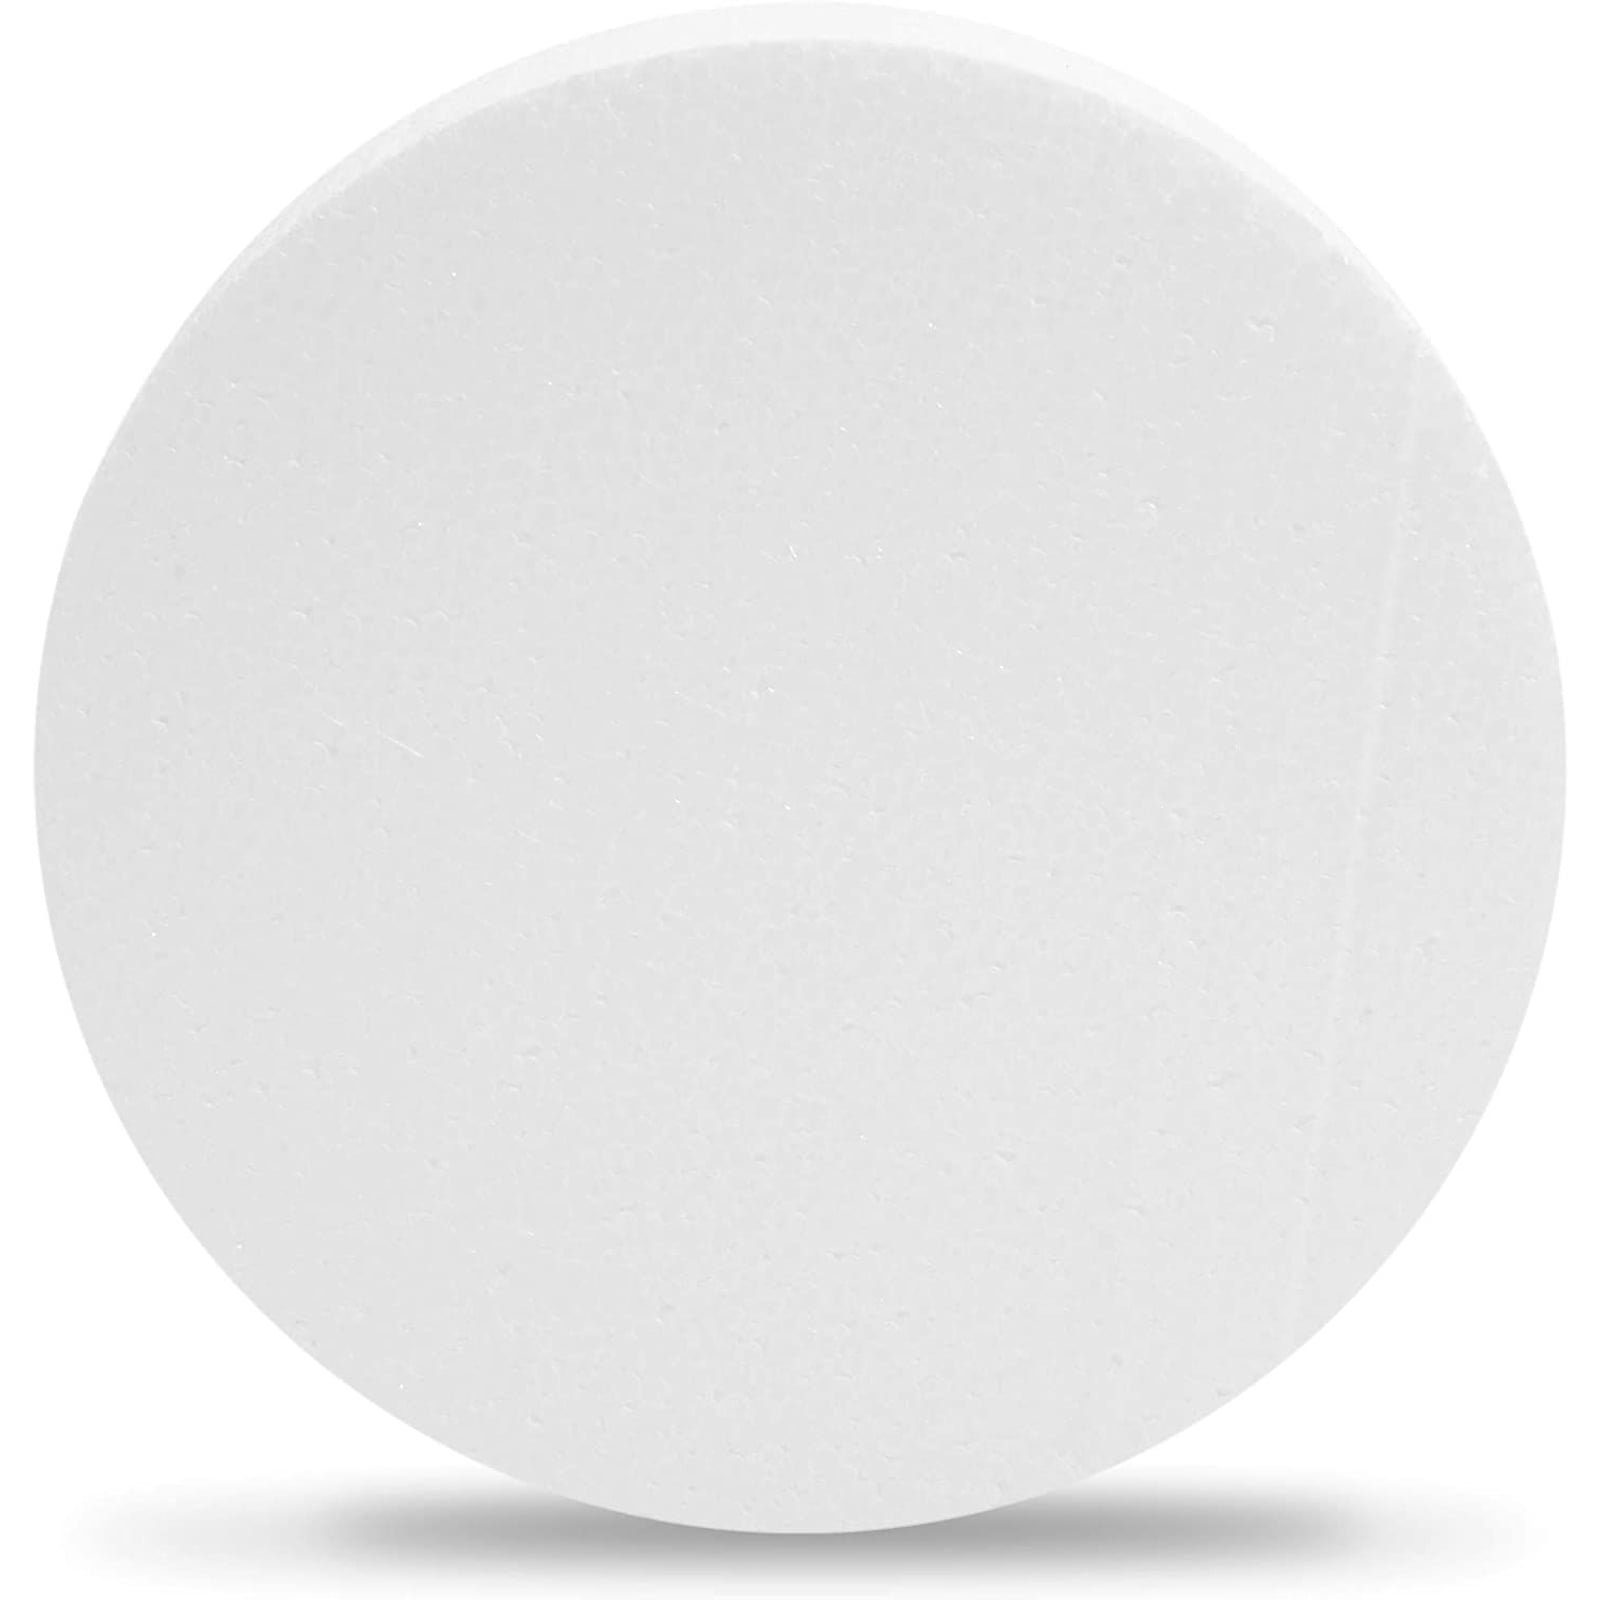 16PCS Round Craft Foam Disc 6 x 6 x 1 inch White EPS Foam Circle, Blank  Foam Circles, Arts and Crafts Supplies for Modeling, Sculpturing, Kids Art